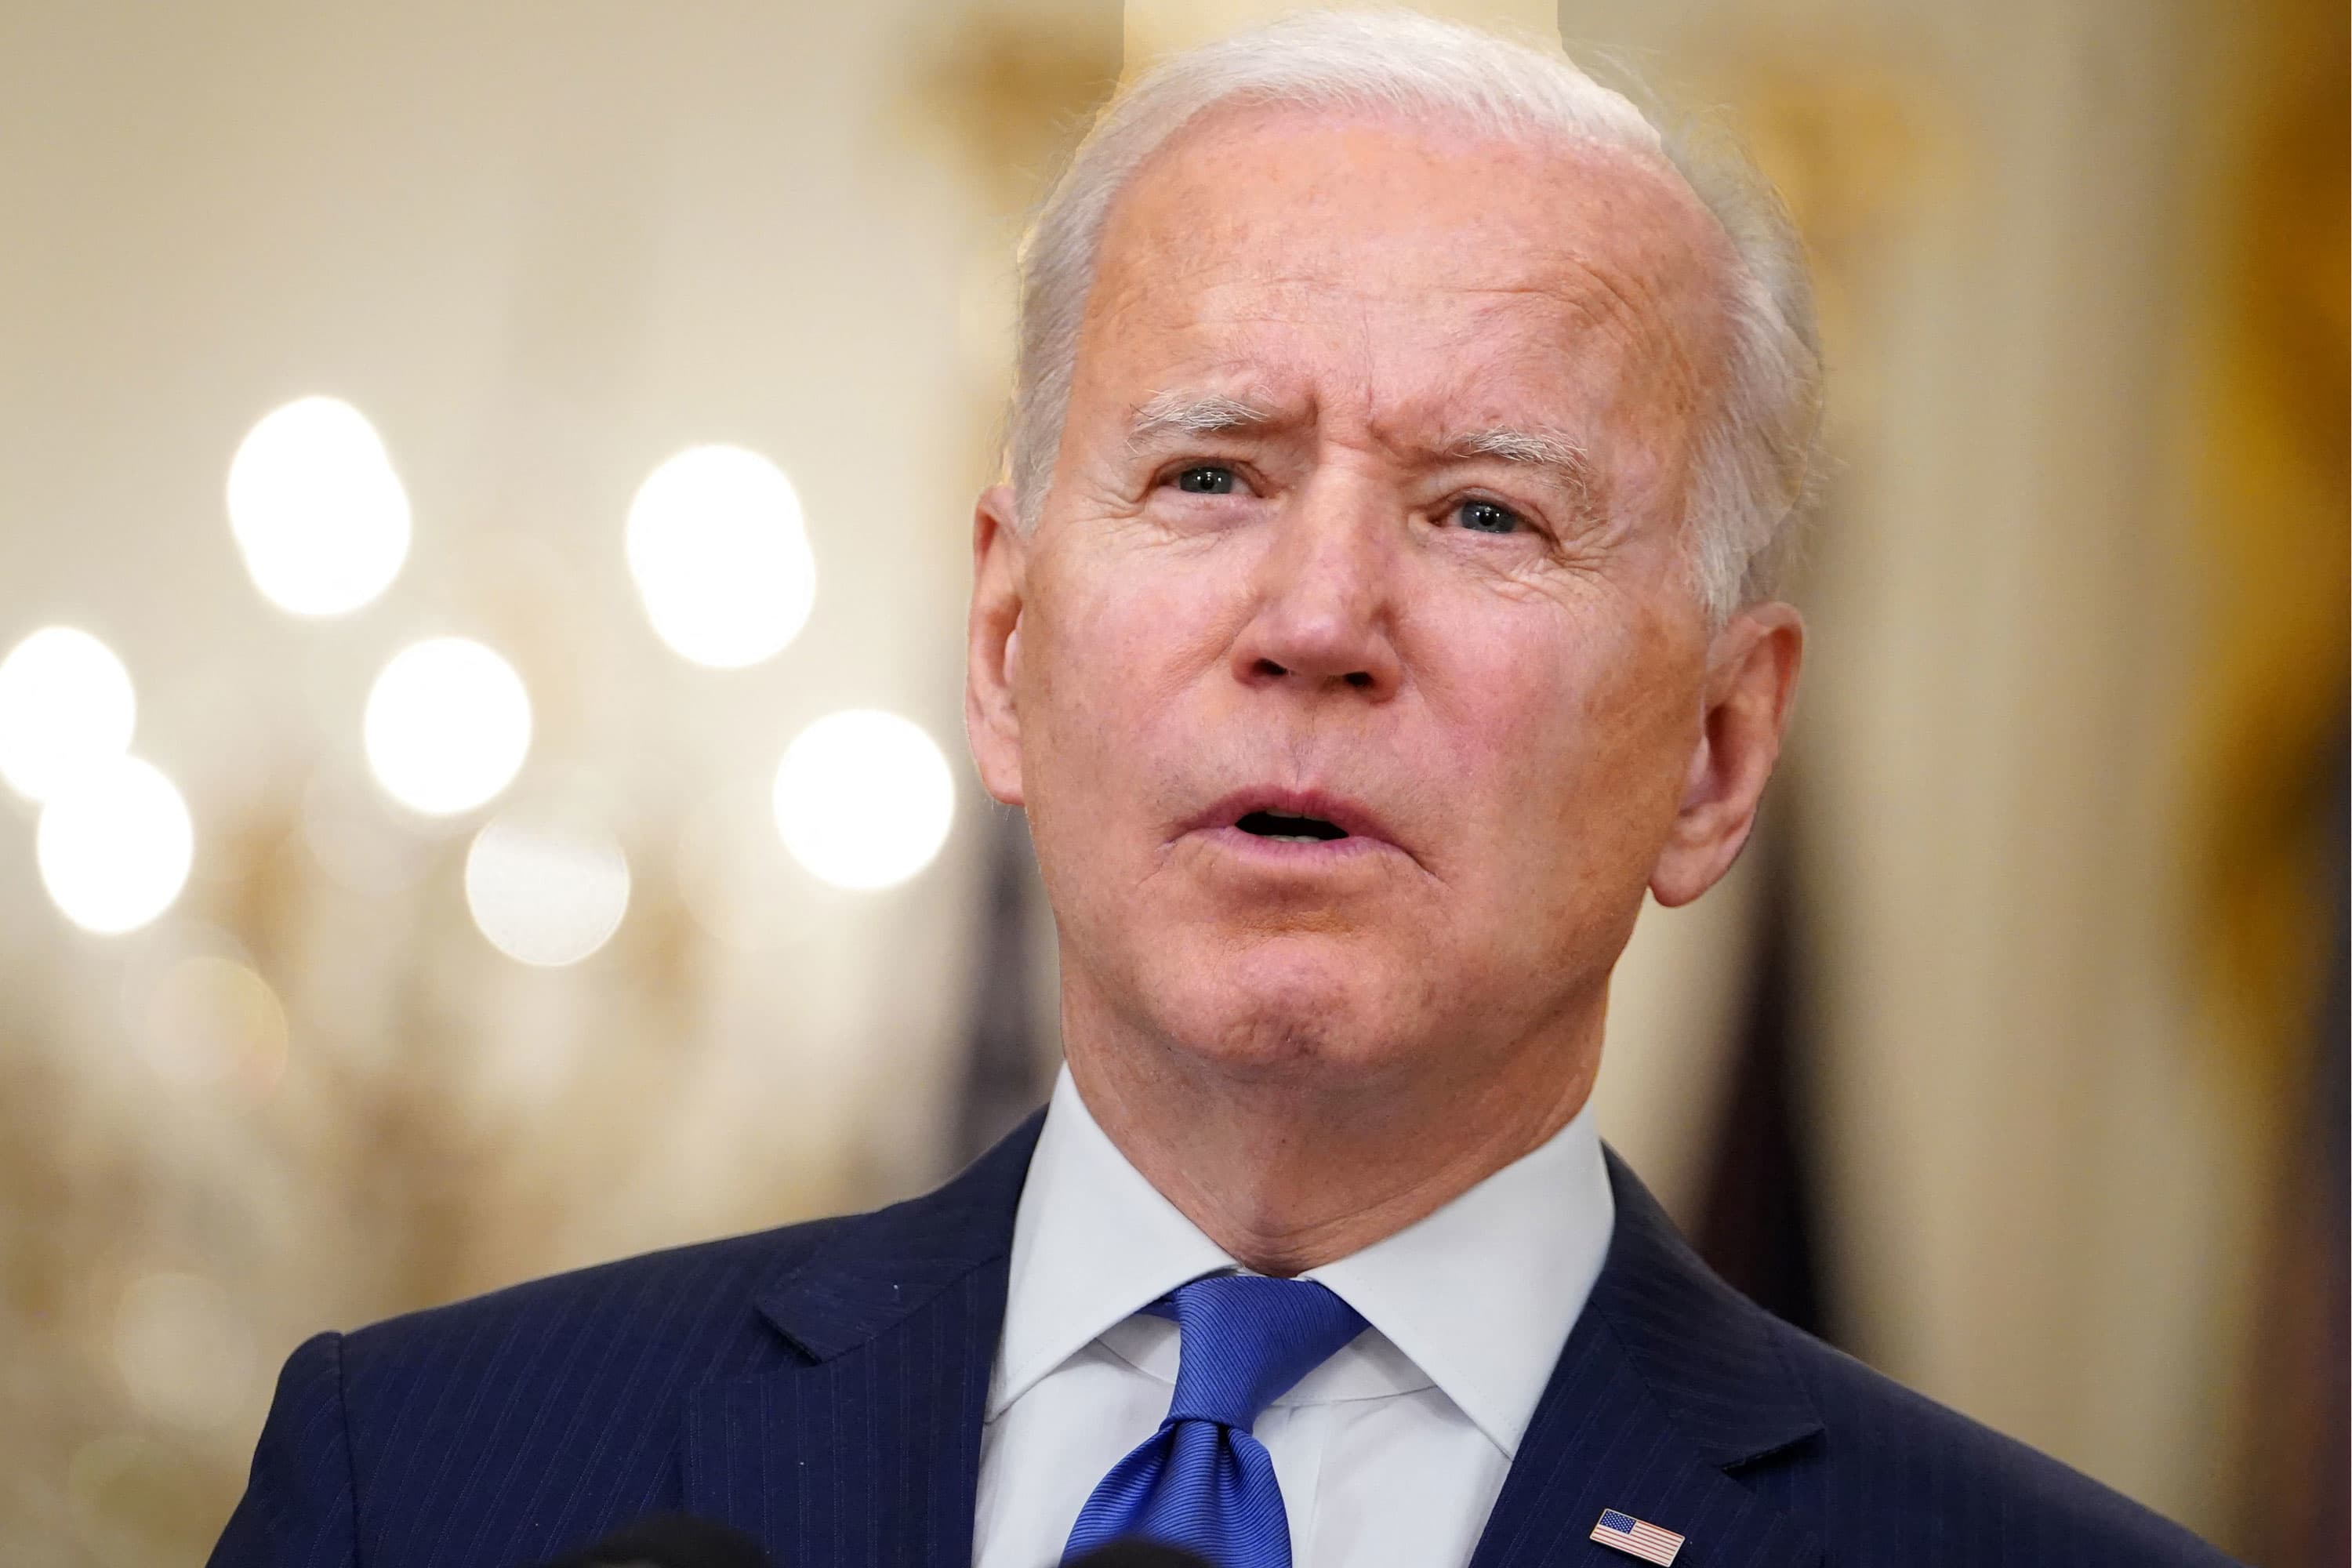 Biden loads administration with Big Tech’s most prominent critics